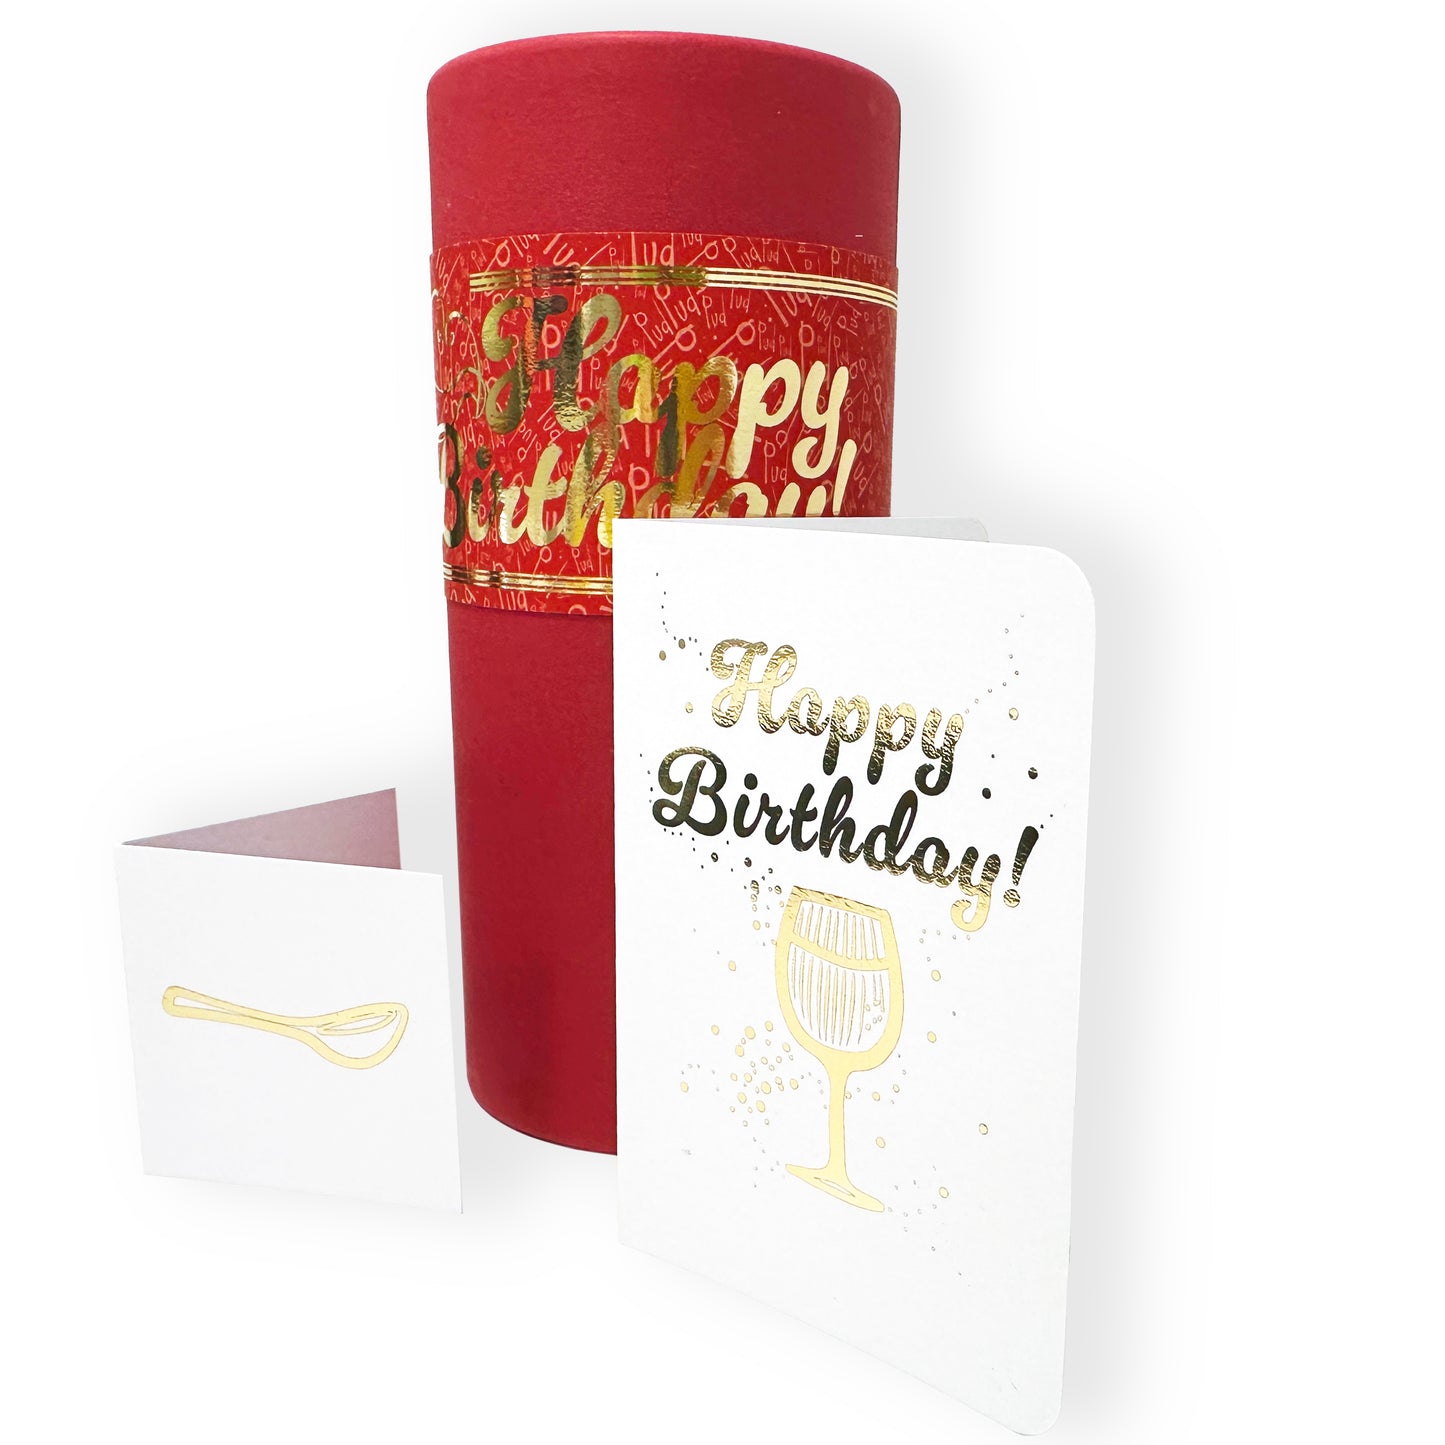 GIFT READY  Birthday Cake Flavoured Pud, with gift box and handwritten birthday card